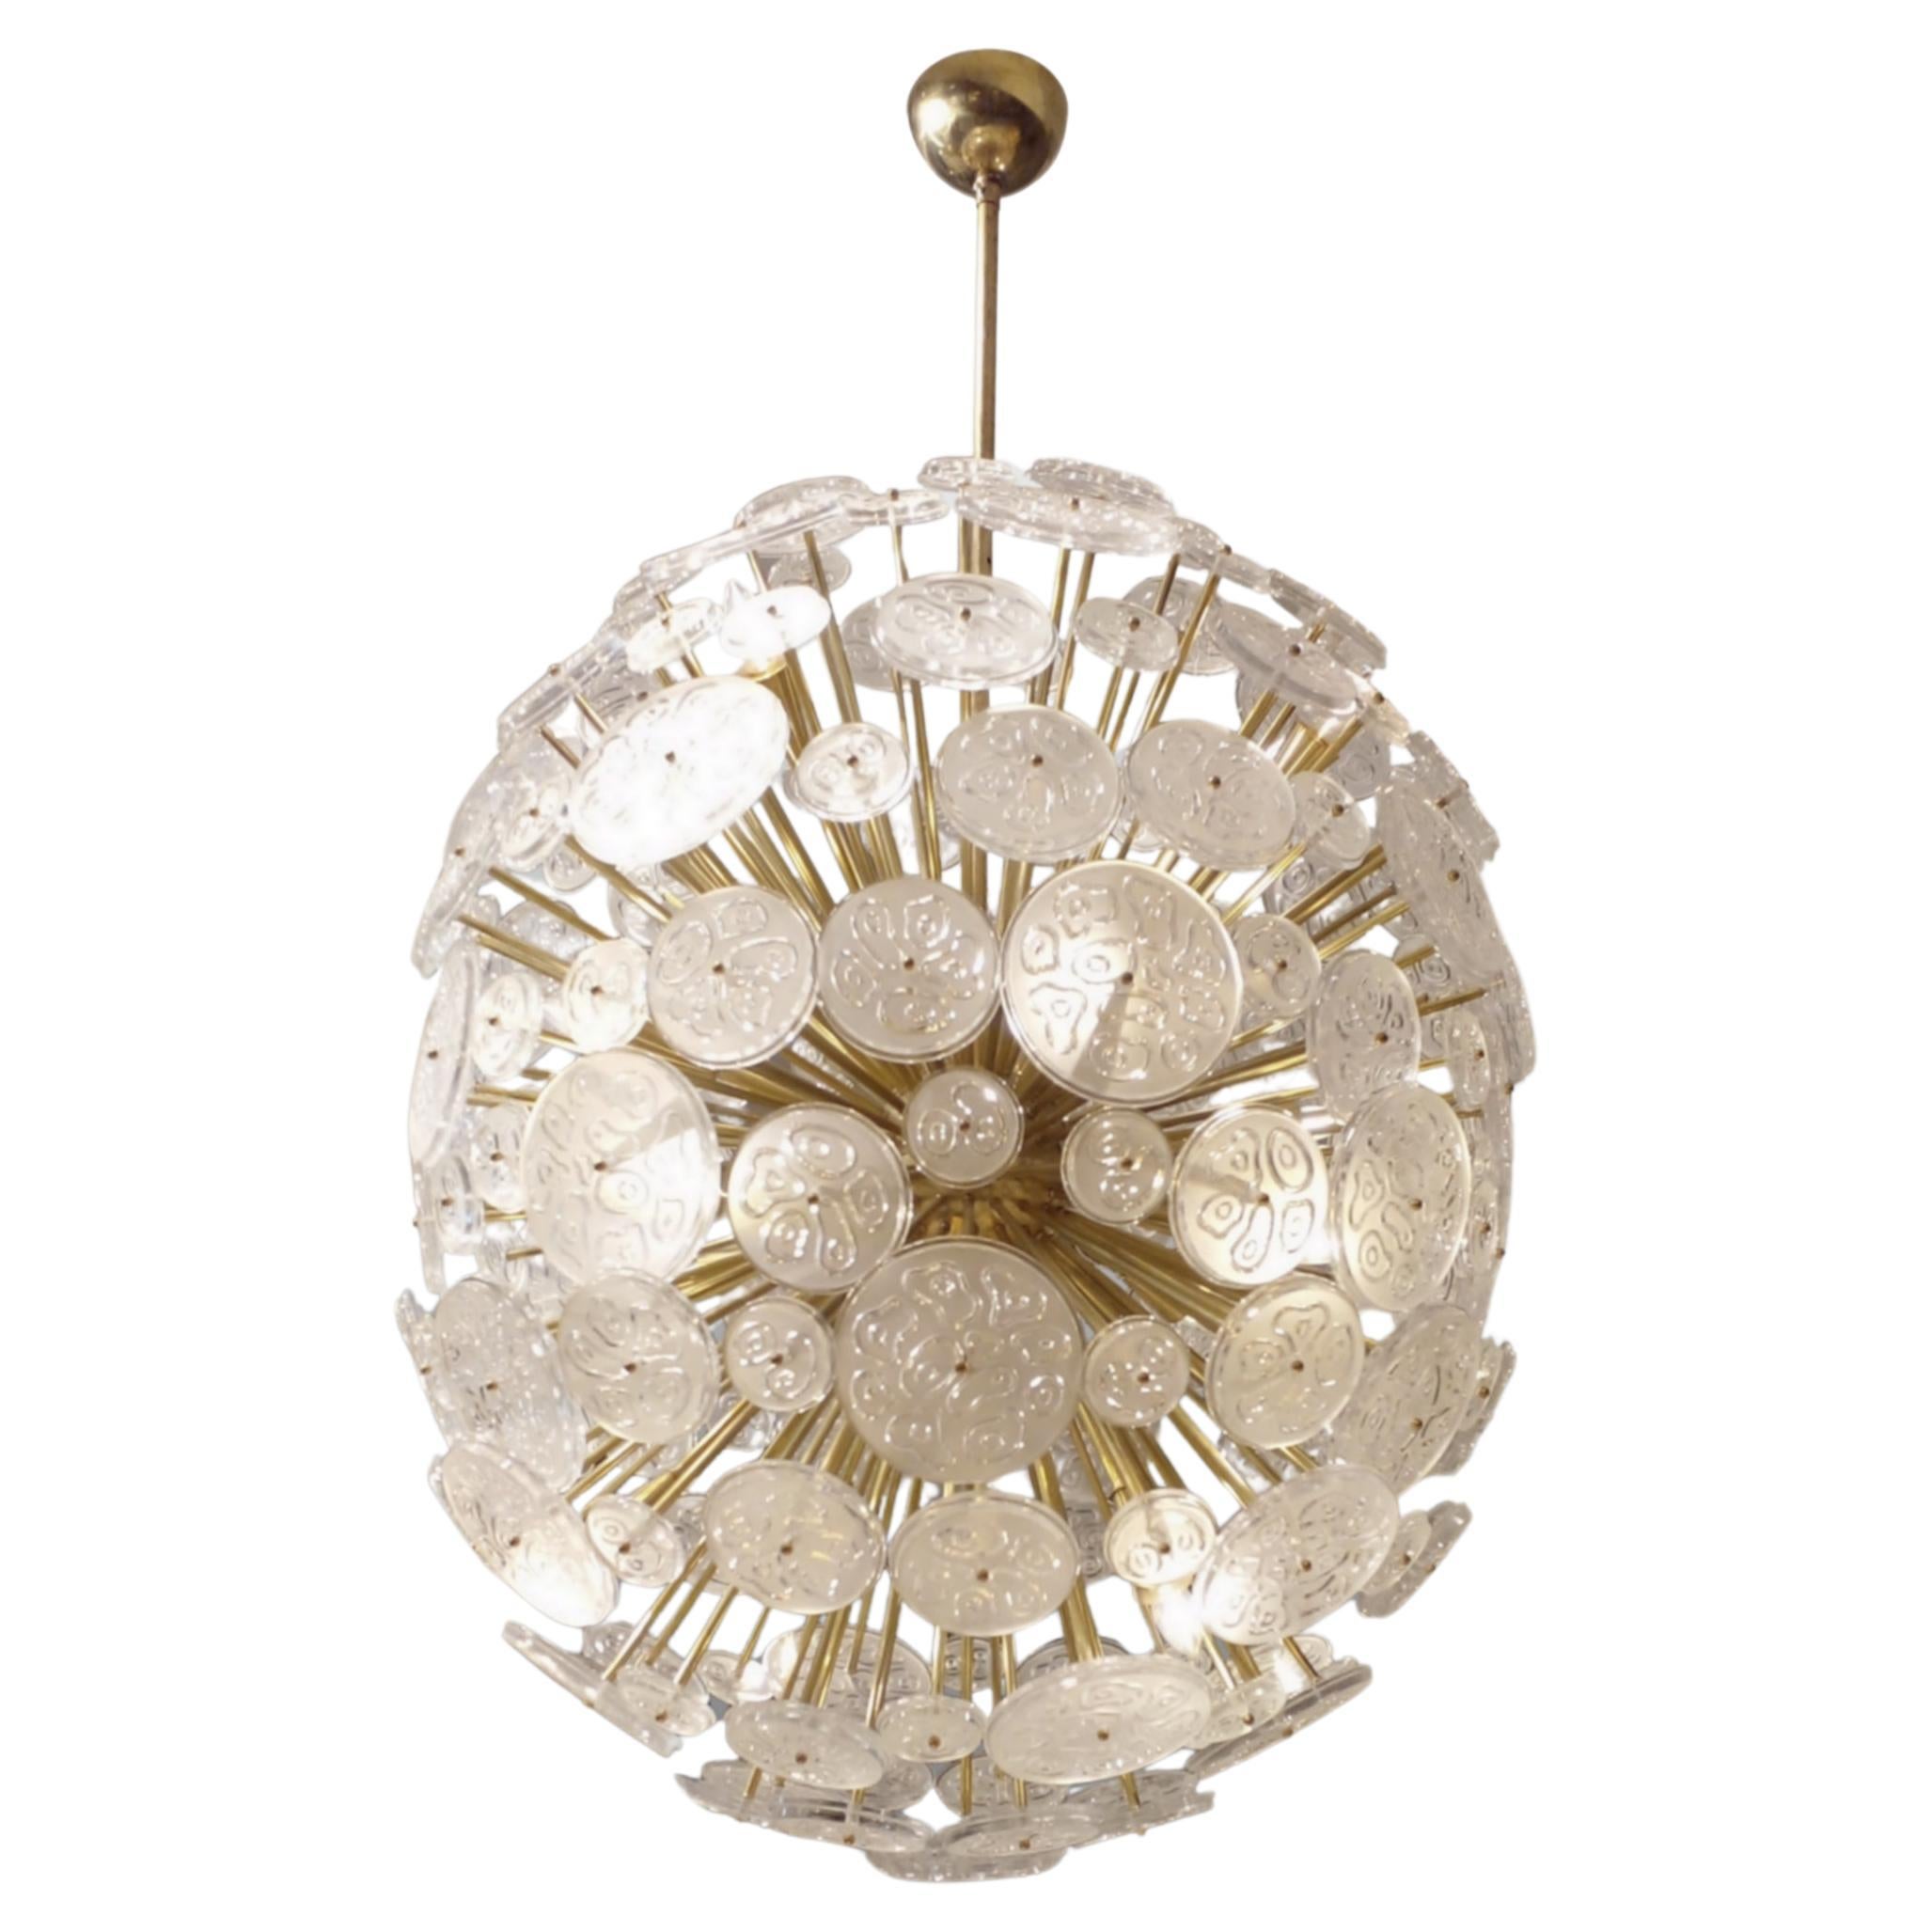 Large "sputnik" chandelier in brass and glass, Murano, Italy, circa 1980